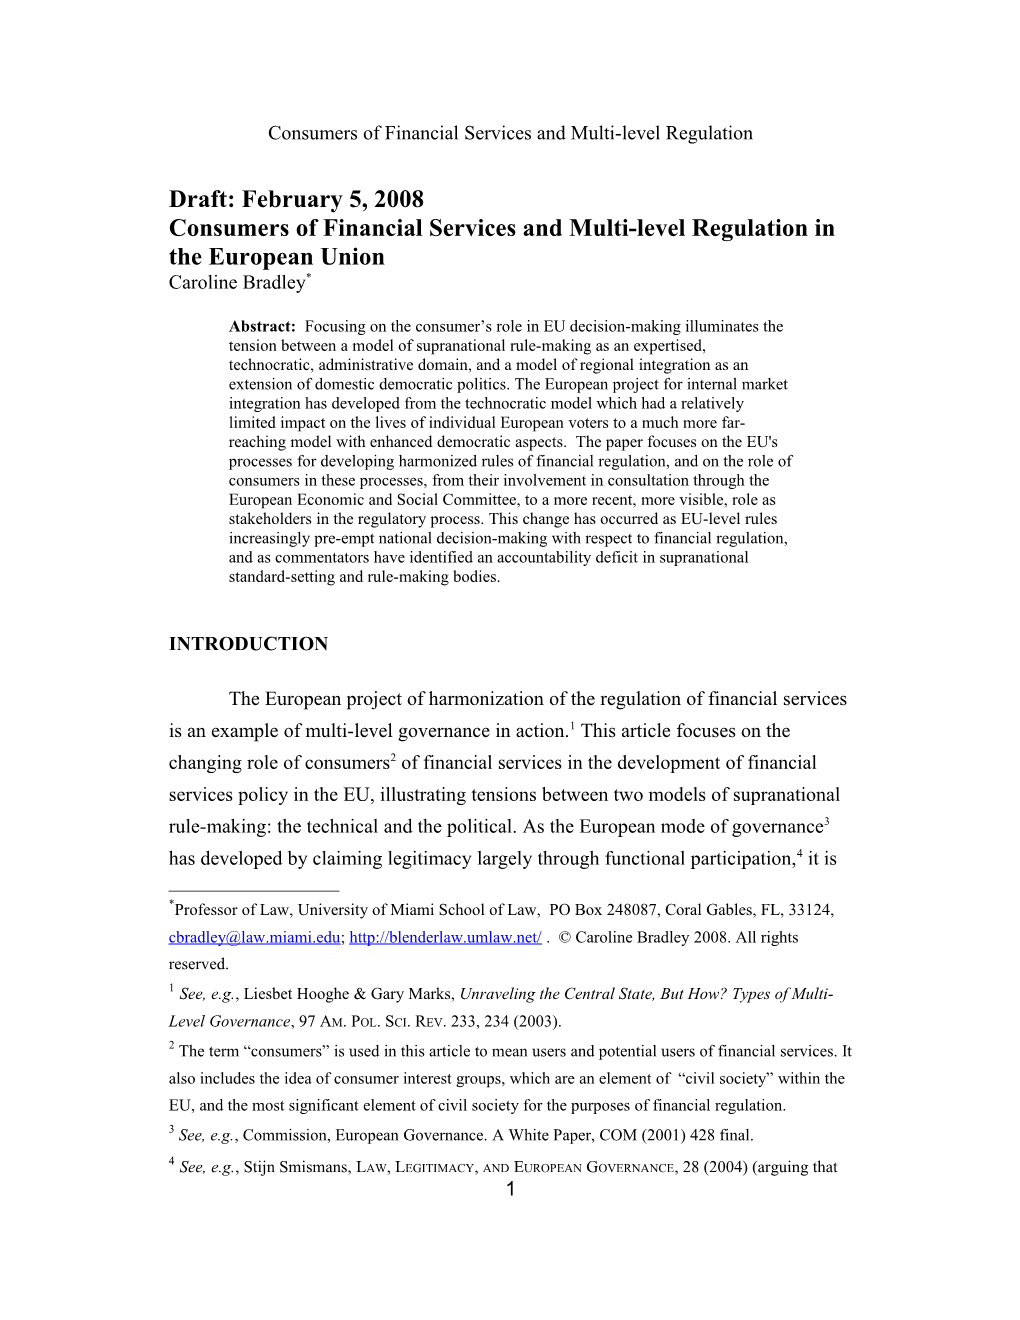 Consumers of Financial Services and Multi-Level Regulation